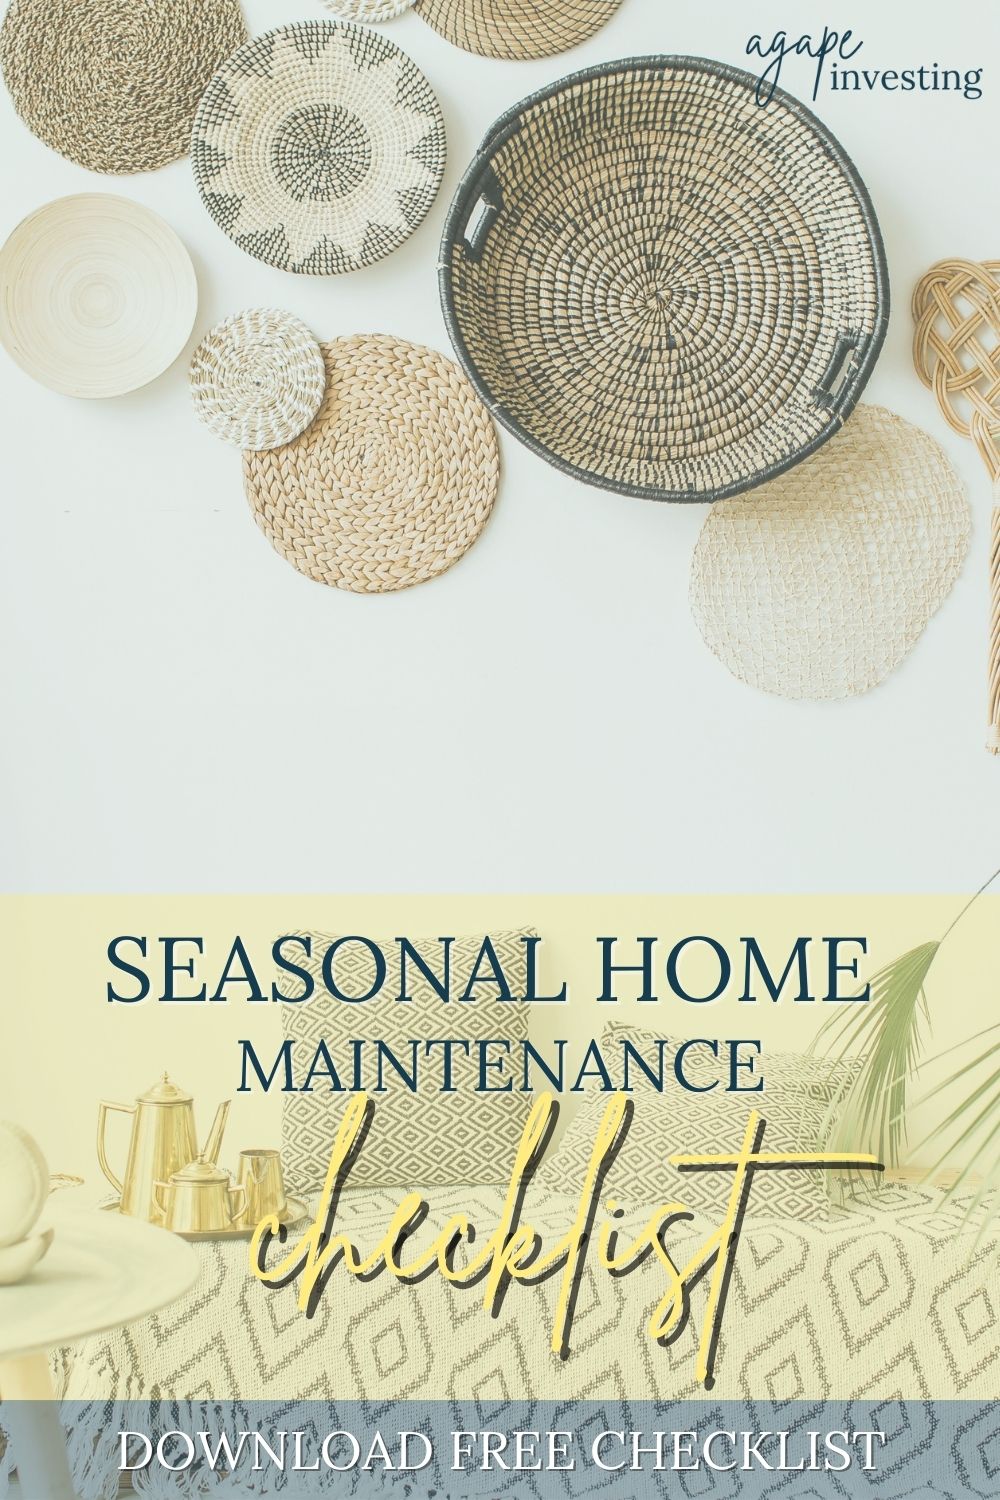 This is the ultimate preventative home maintenance checklist. It will teach you exactly how to take care of your home to keep it happy and healthy for a long time. You will learn why preventative home maintenance is important as well as how often you should perform these tasks. #homemaintenance #diyhomemaintenance #homemaintenancechecklist #maintenancechecklist